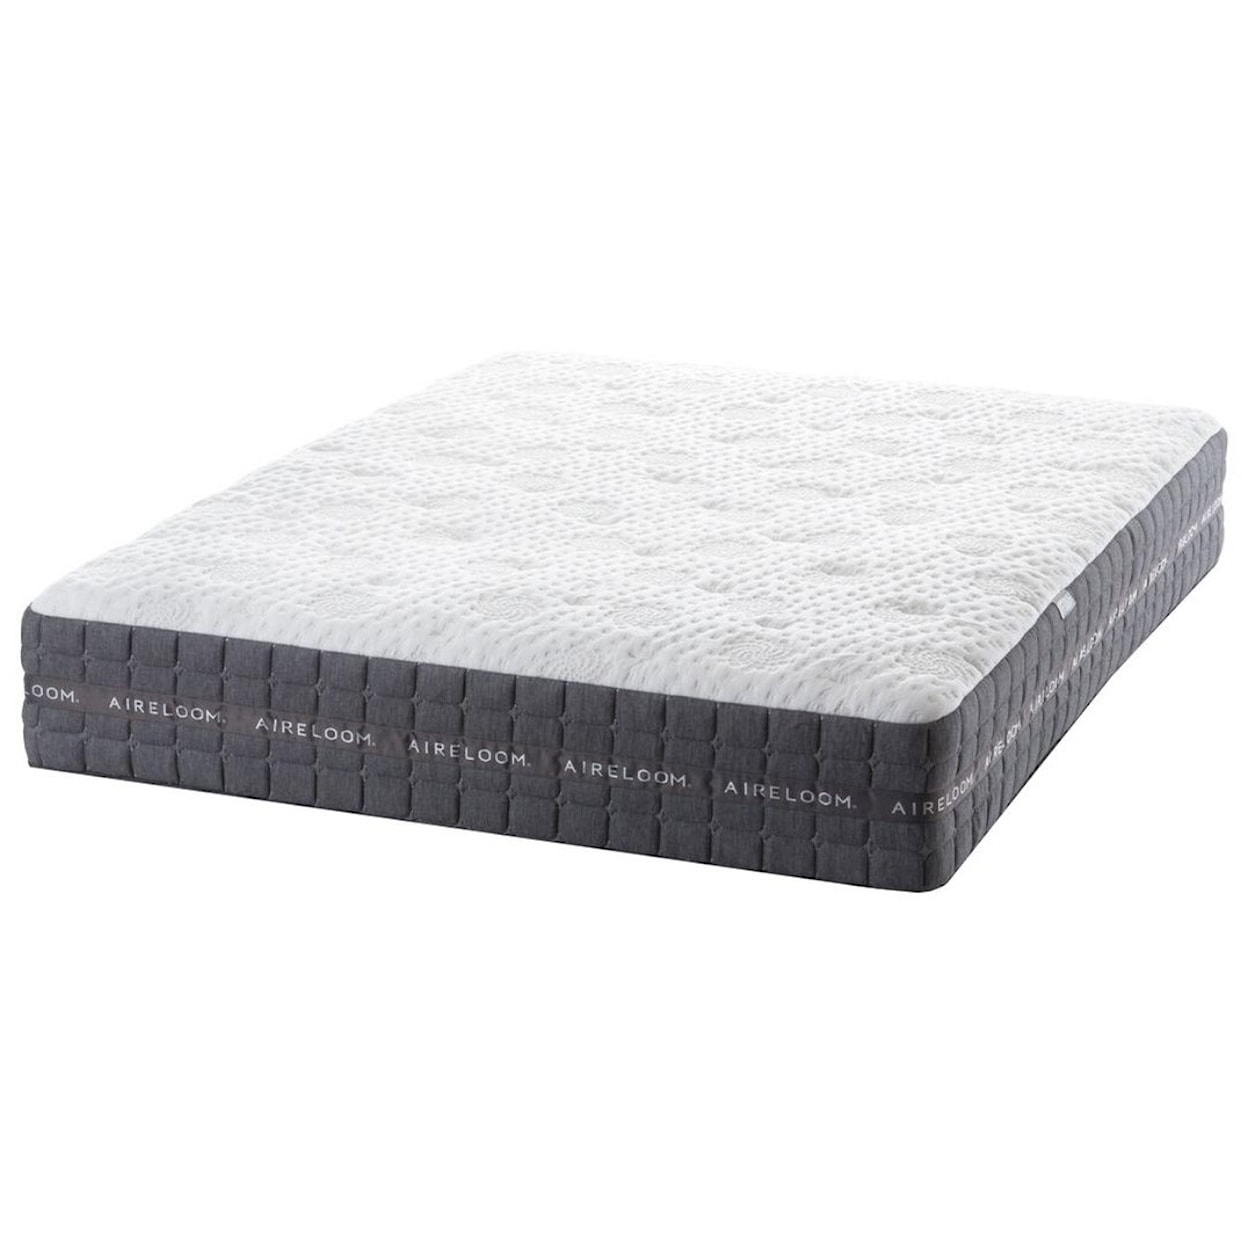 Aireloom Bedding Aspire La Brea Firm King Firm Coil on Coil Mattress